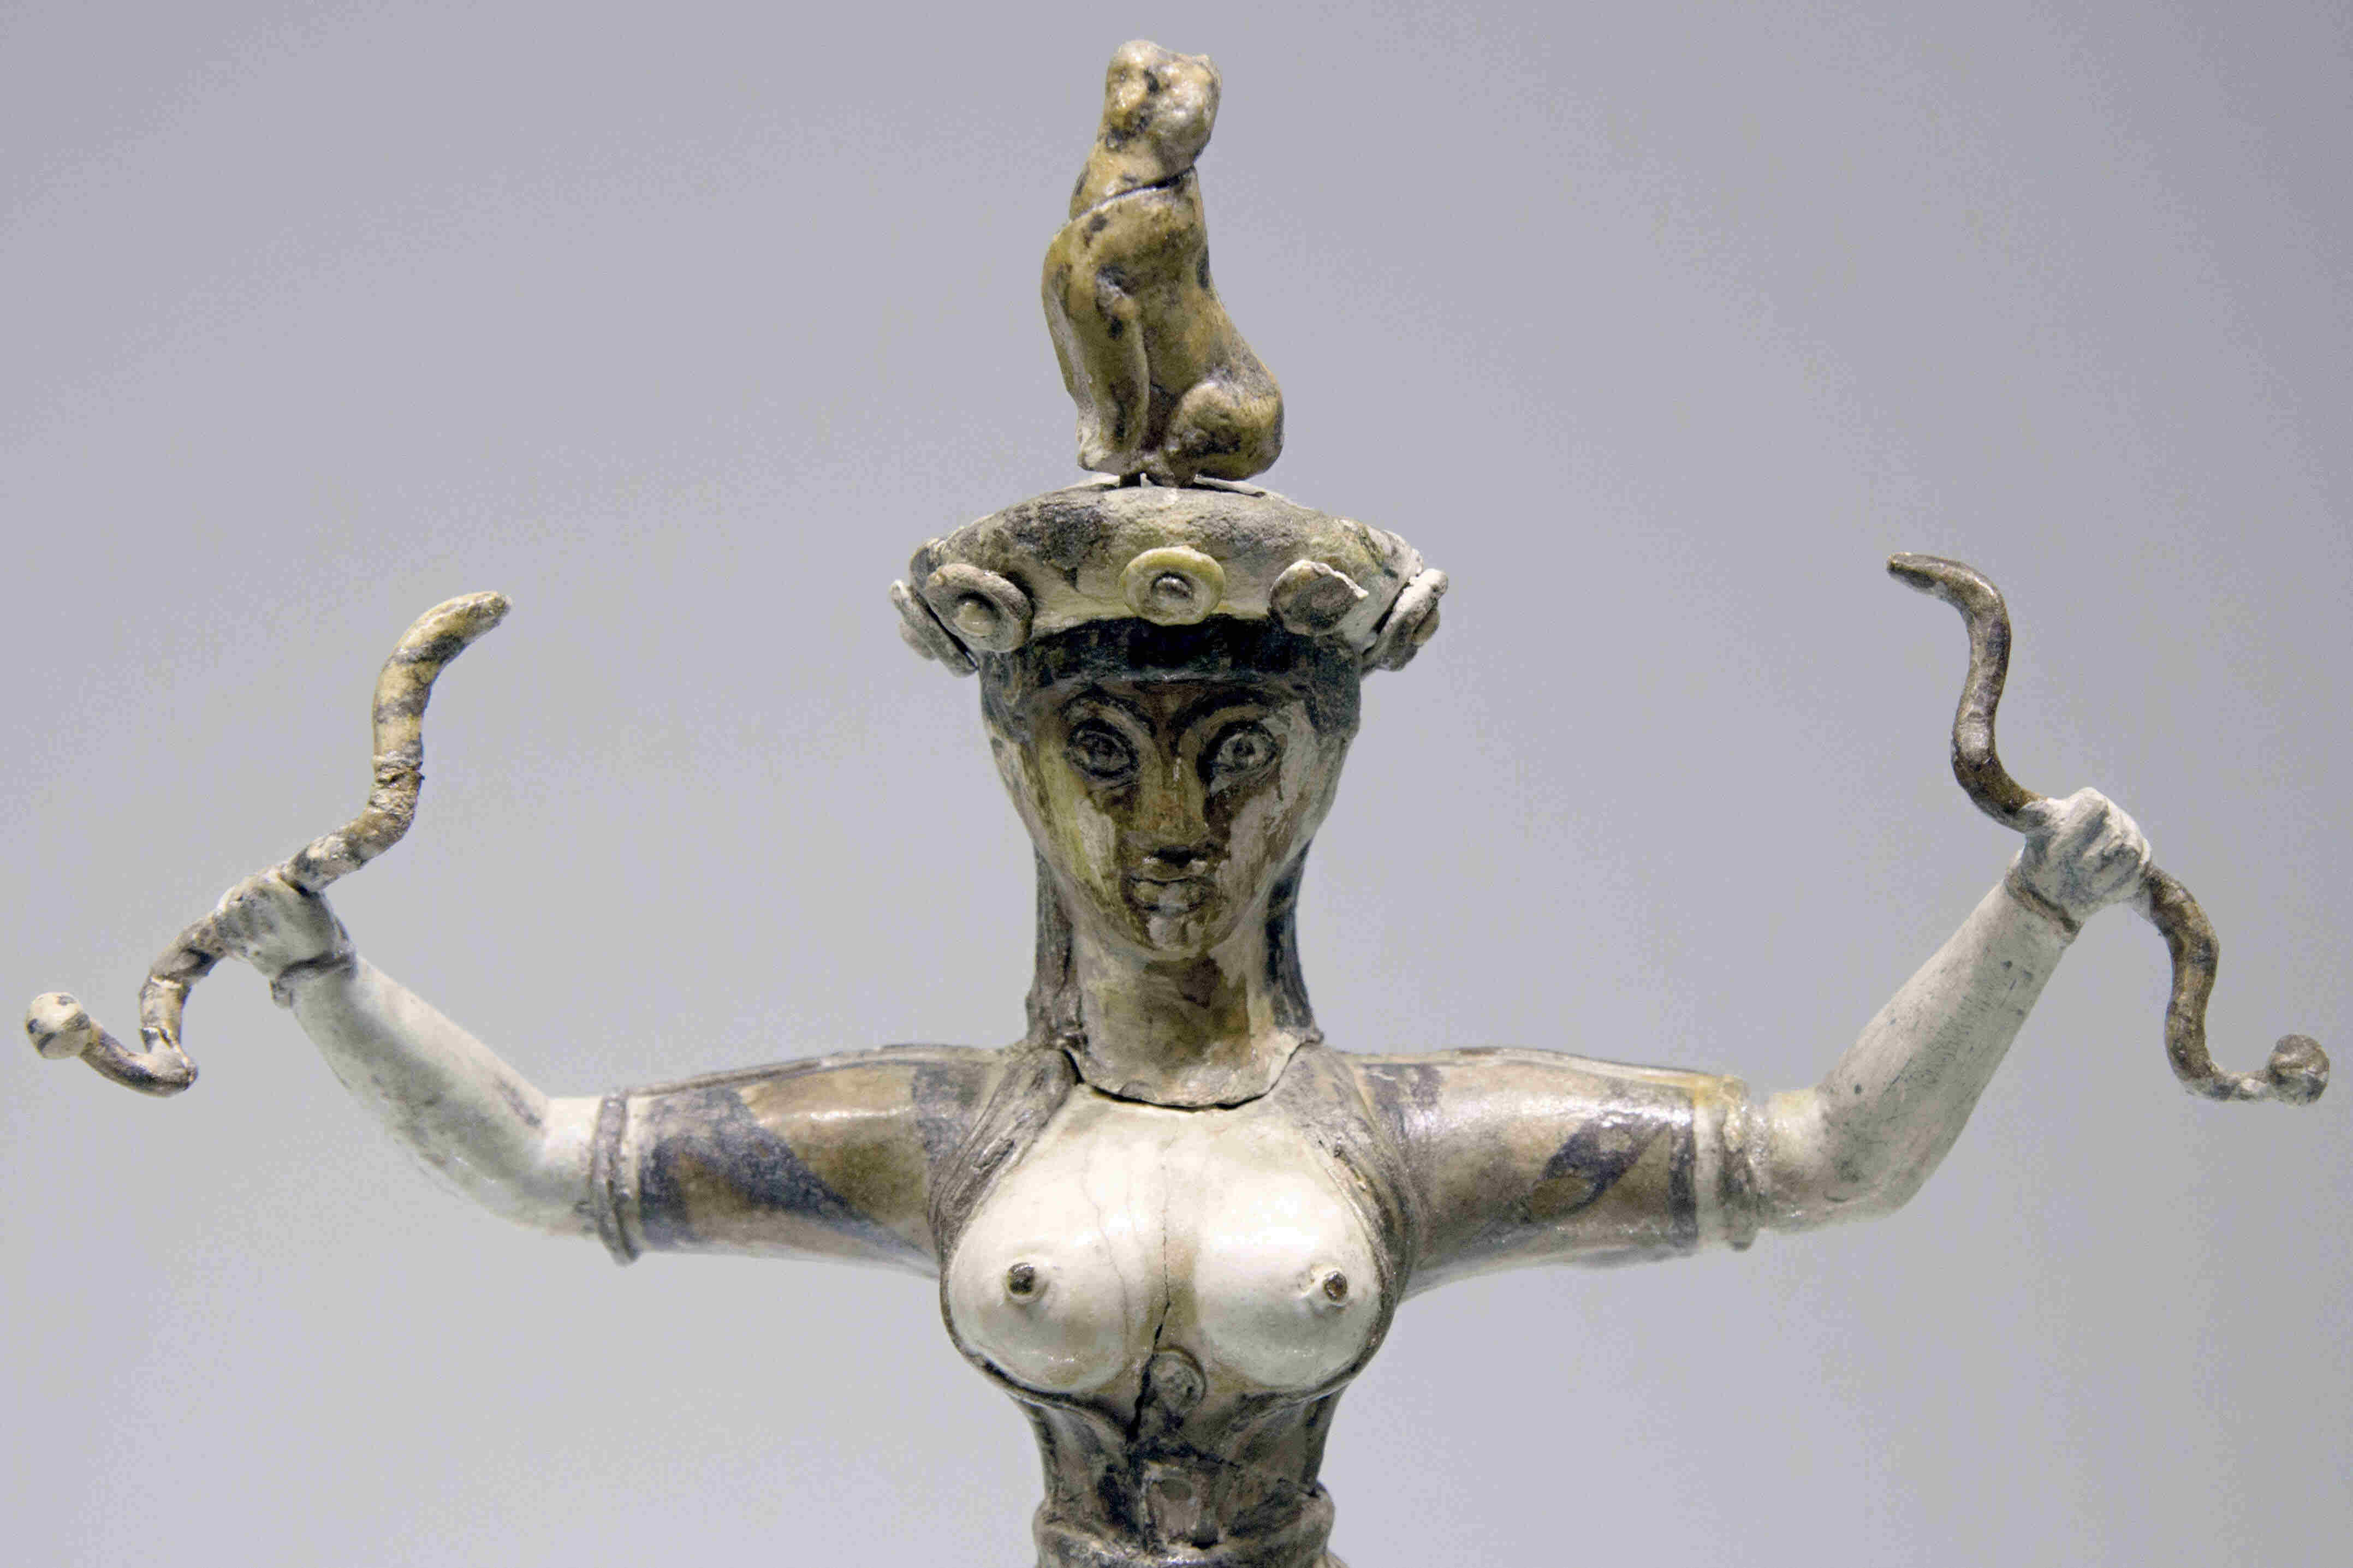 the-snake-goddess-sculpture-belongs-to-which-culture